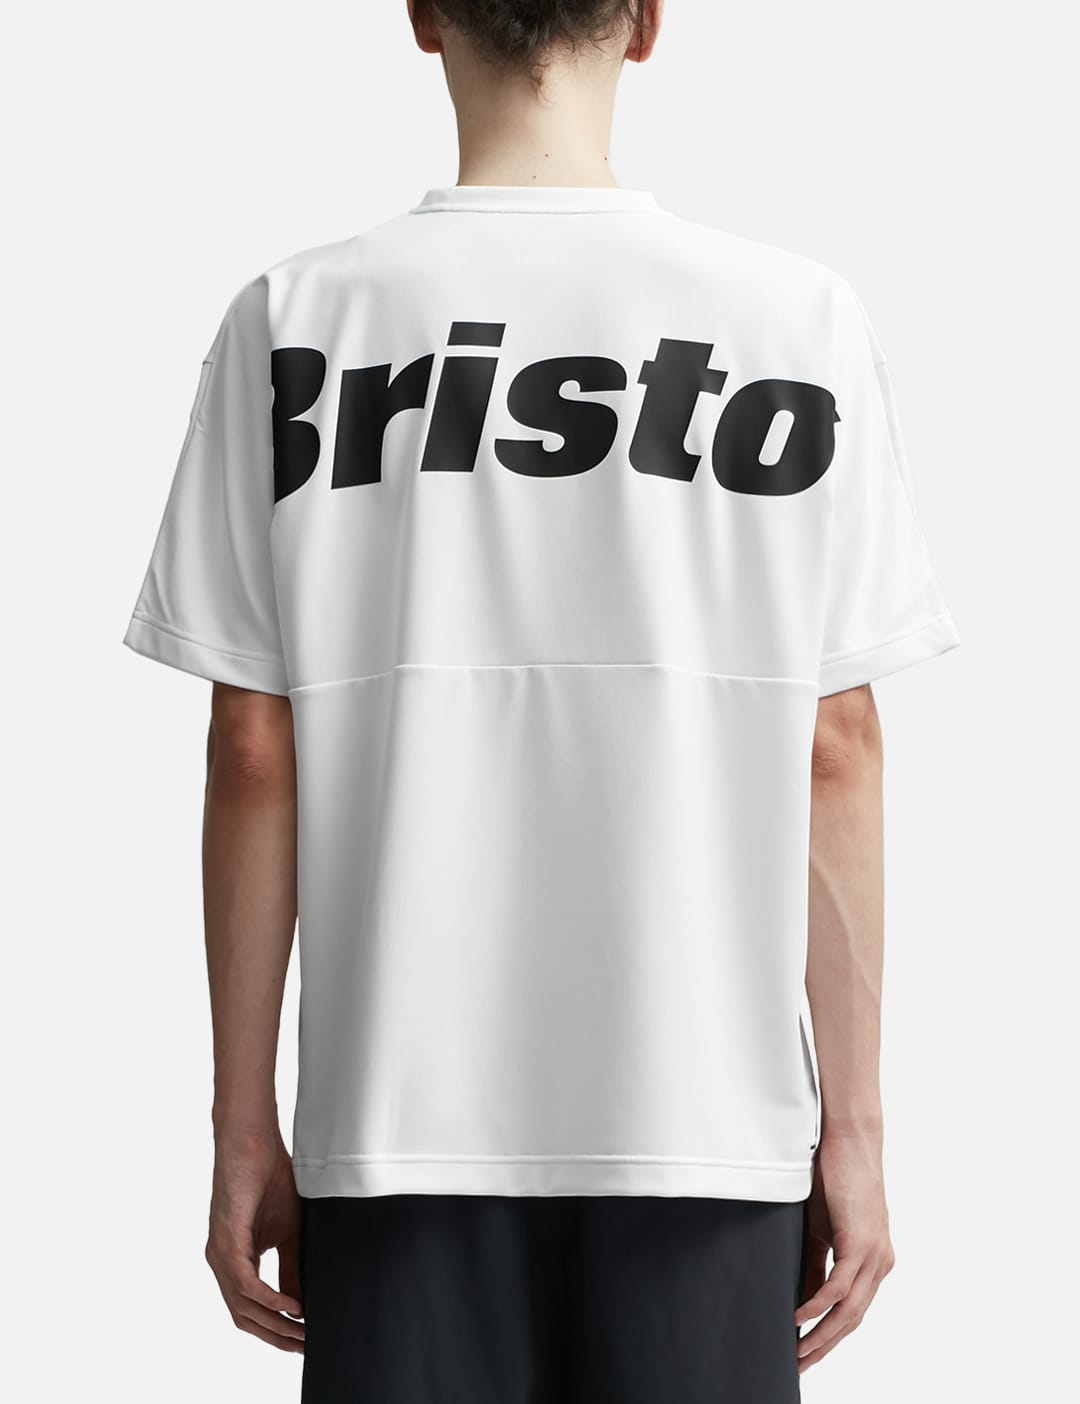 F.C. Real Bristol - Big Logo Wide T-shirt | HBX - Globally Curated